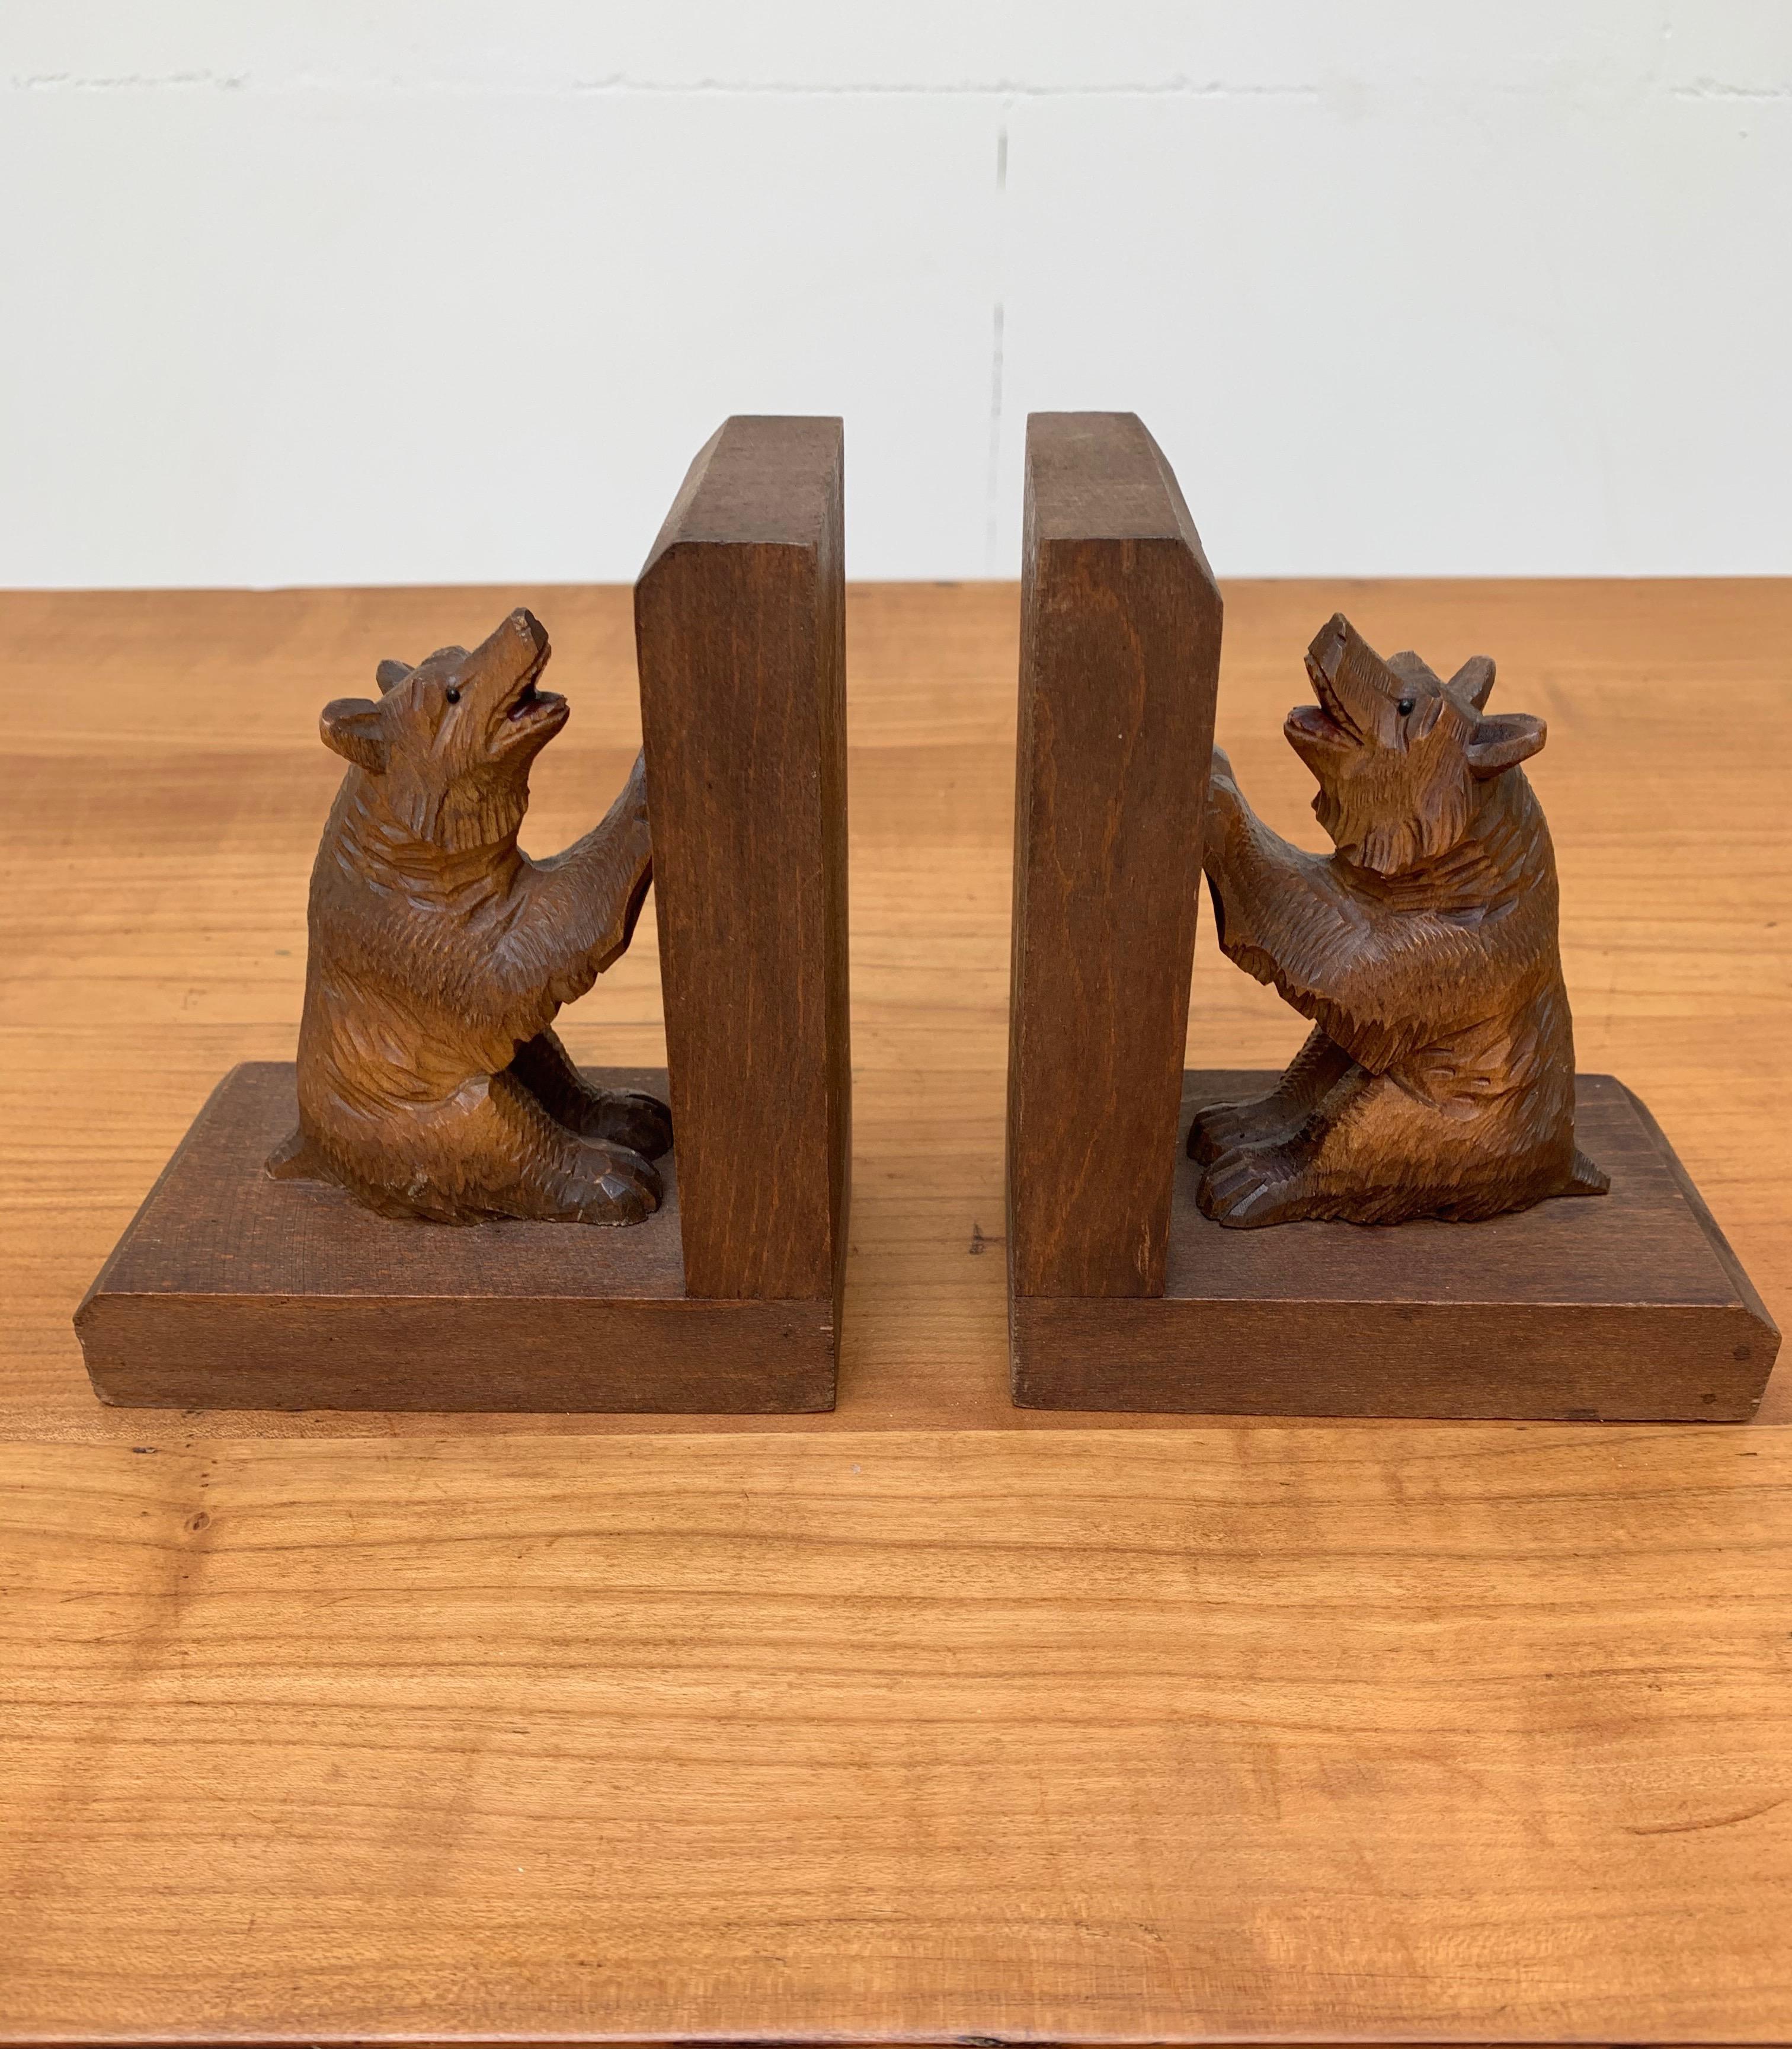 Early 20th Century Art Deco Era Bookends with Hand Carved Bear Sculptures For Sale 6